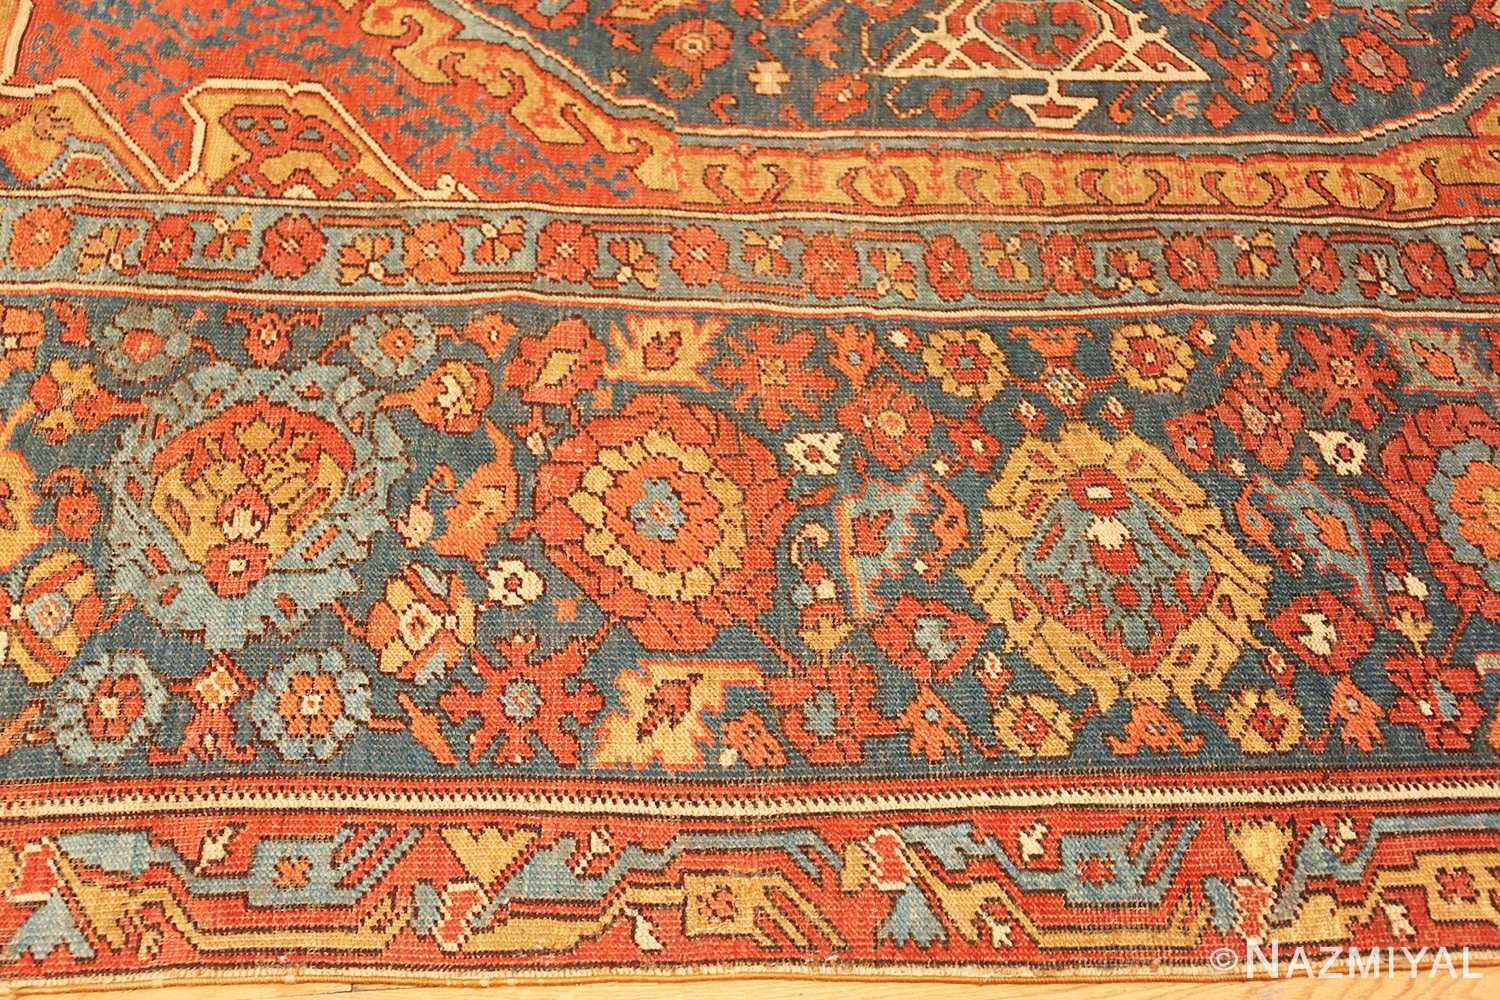 Border Of Antique 17 Century Turkish Smyrna Rug 70267 by Nazmiyal Antique Rugs in NYC